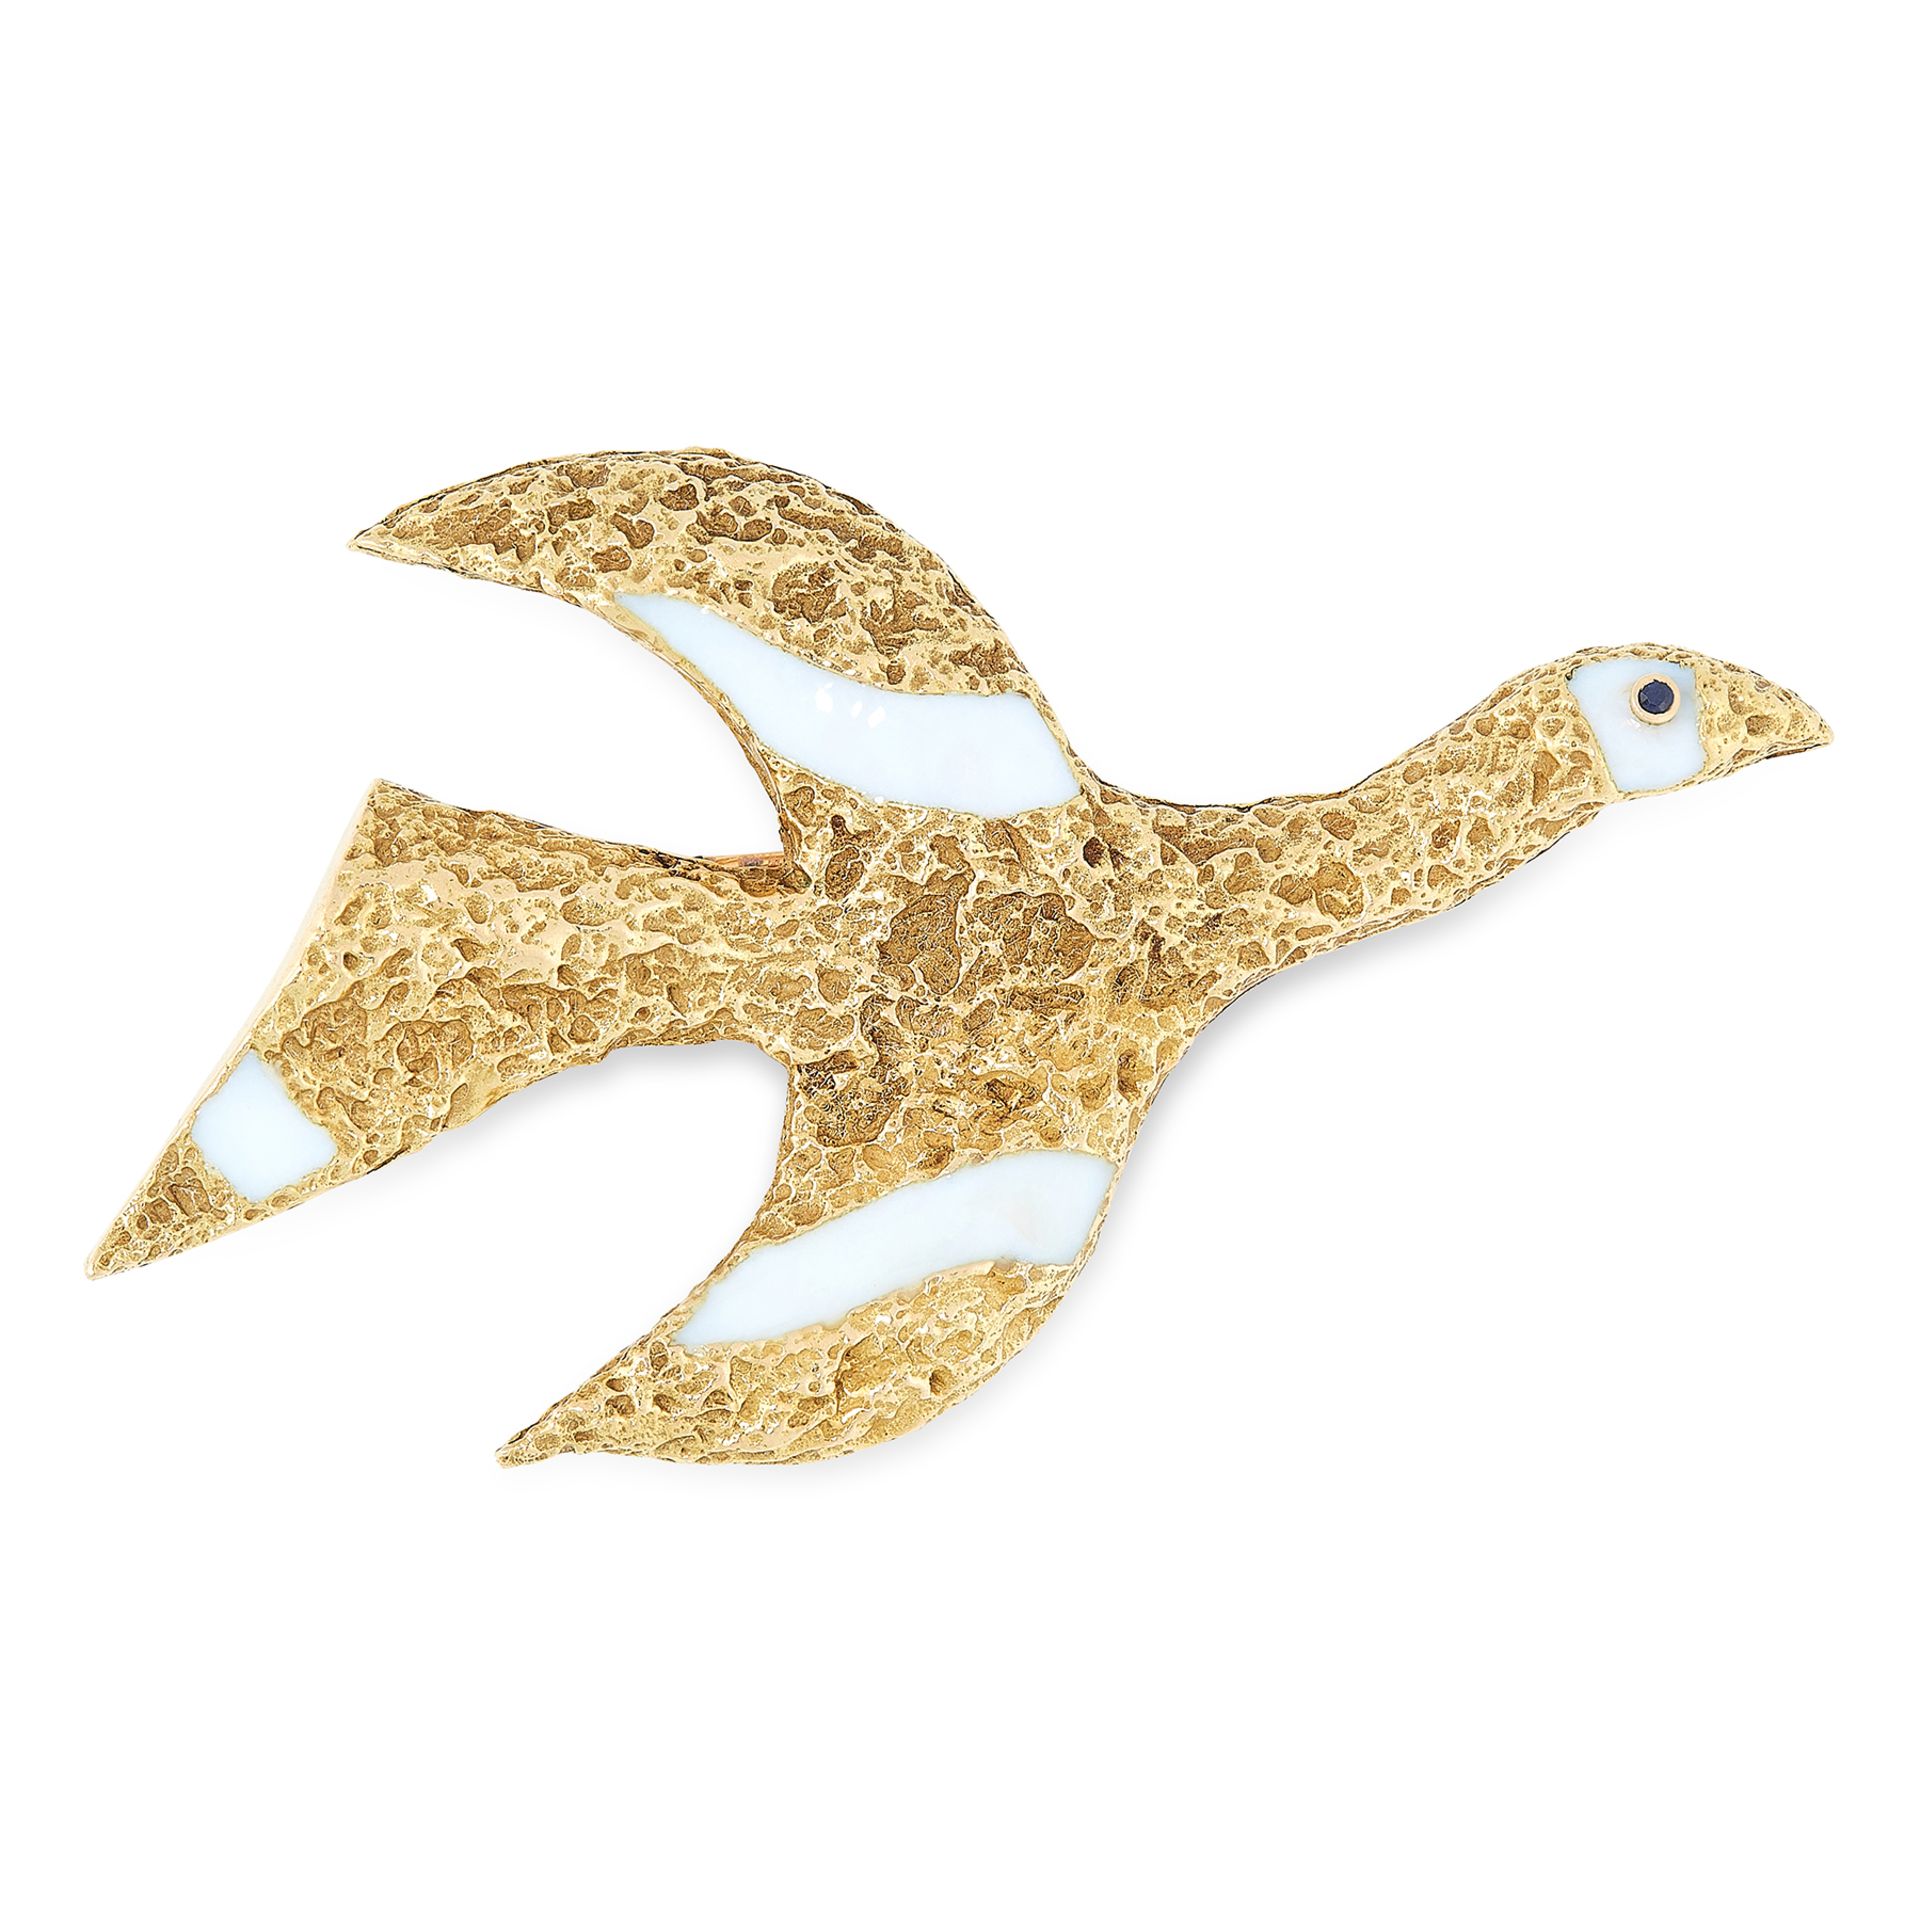 A VINTAGE ENAMEL TITHONOS BROOCH, GEORGES BRAQUE in 18ct yellow gold, designed as a bird, in the